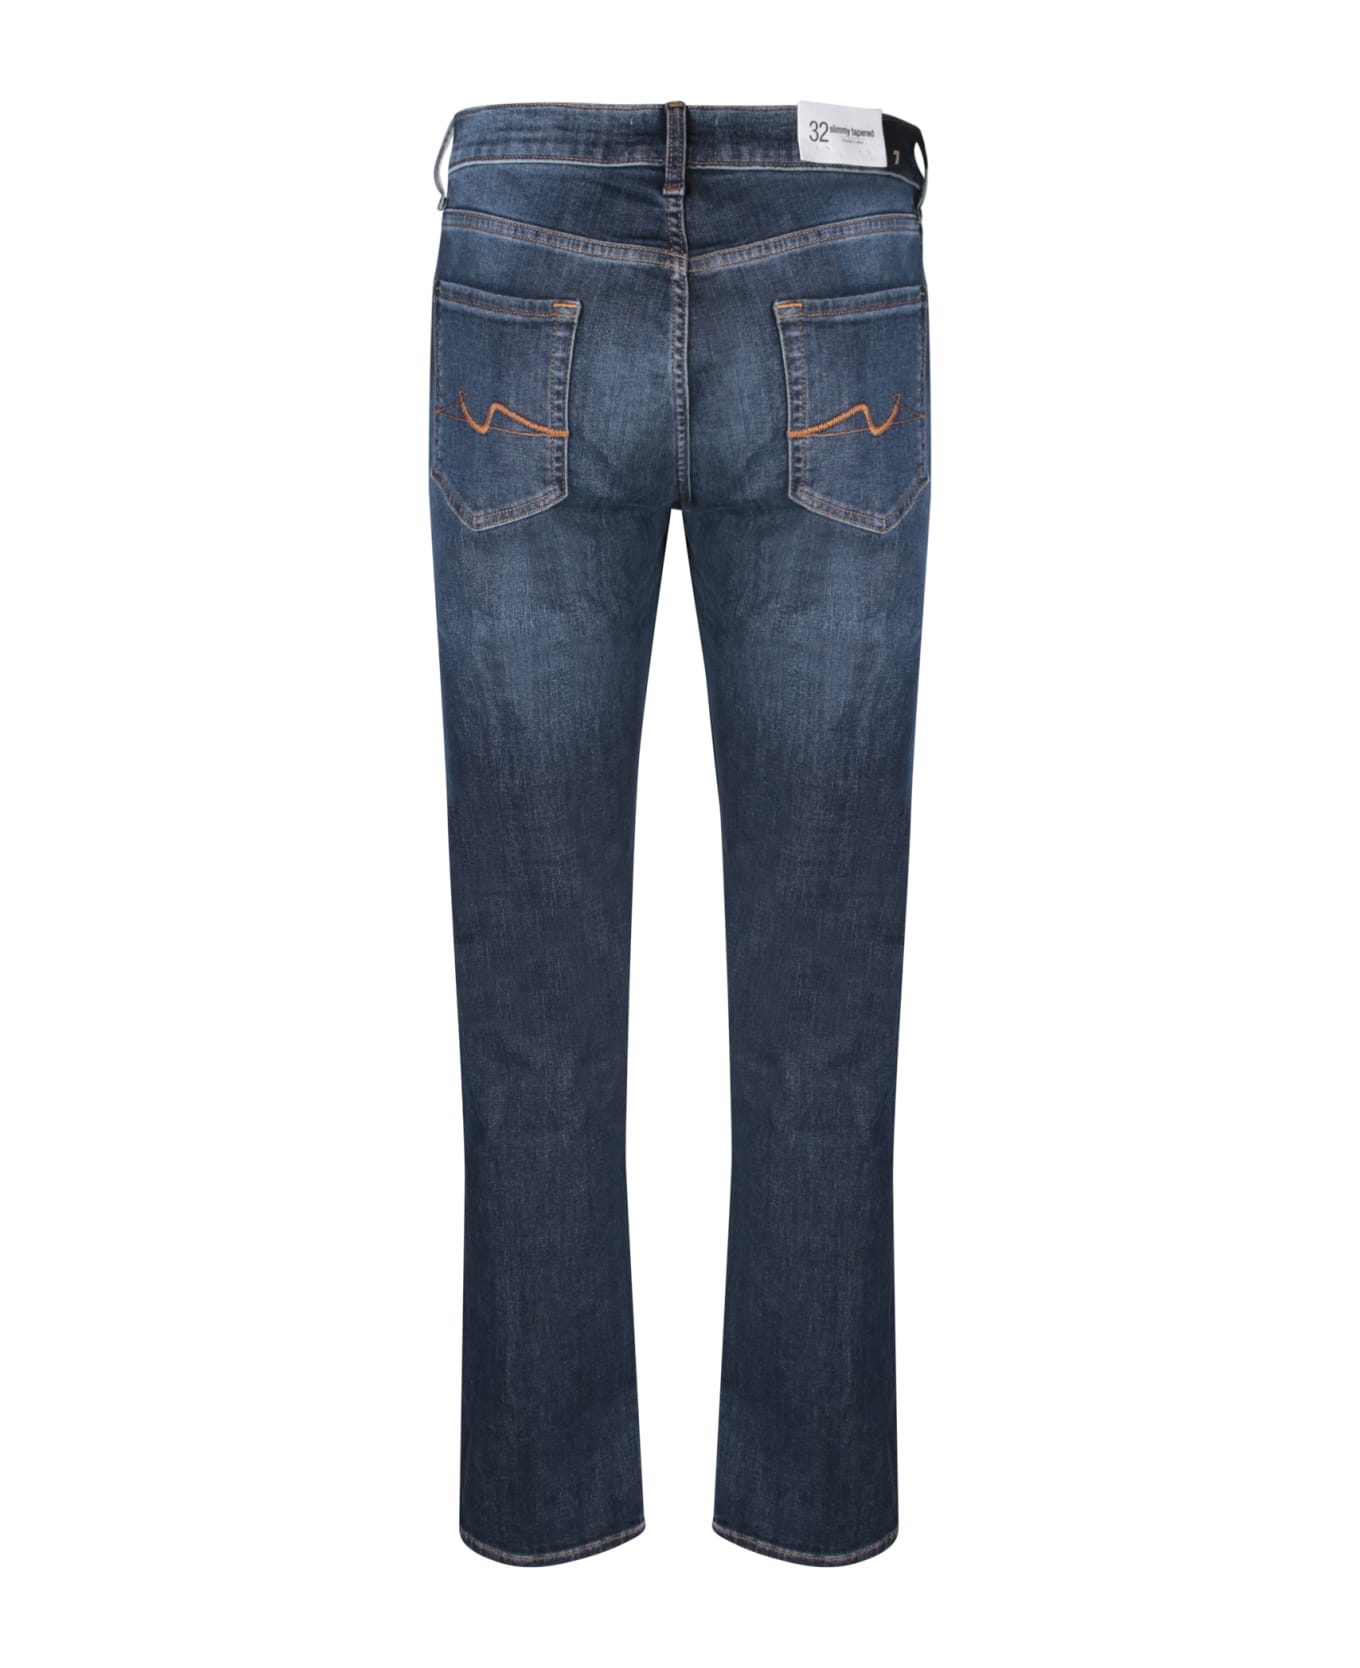 7 For All Mankind Slimmy Tapered Dark Blue Jeans - Blue